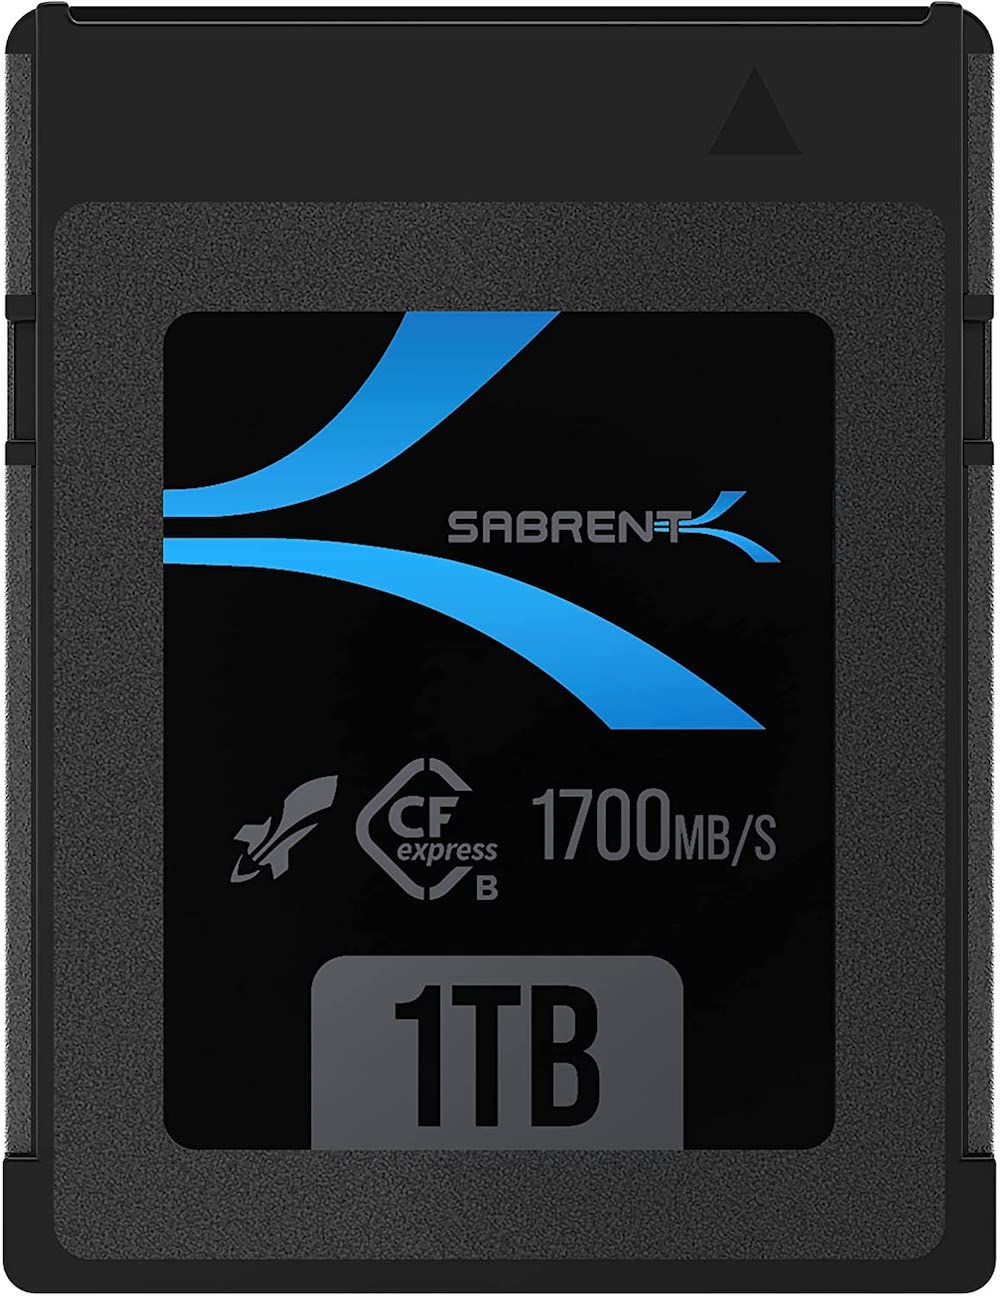 The Sabrent 1TB card costs around $490 and can be pre-ordered on Amazon